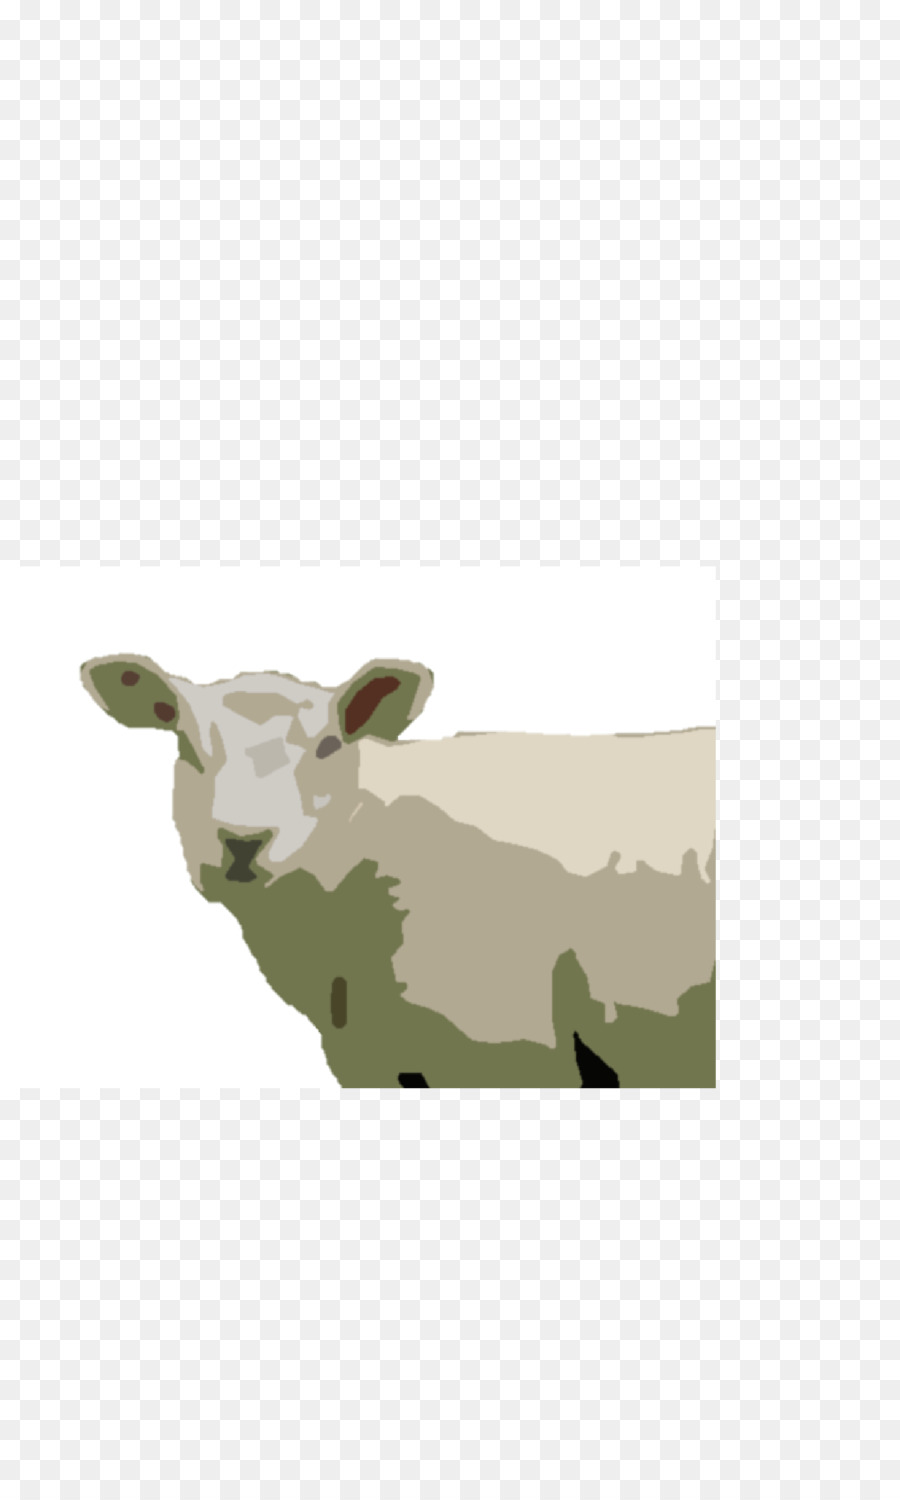 Cattle Rectangle - design png download - 1700*2800 - Free Transparent Cattle png Download.